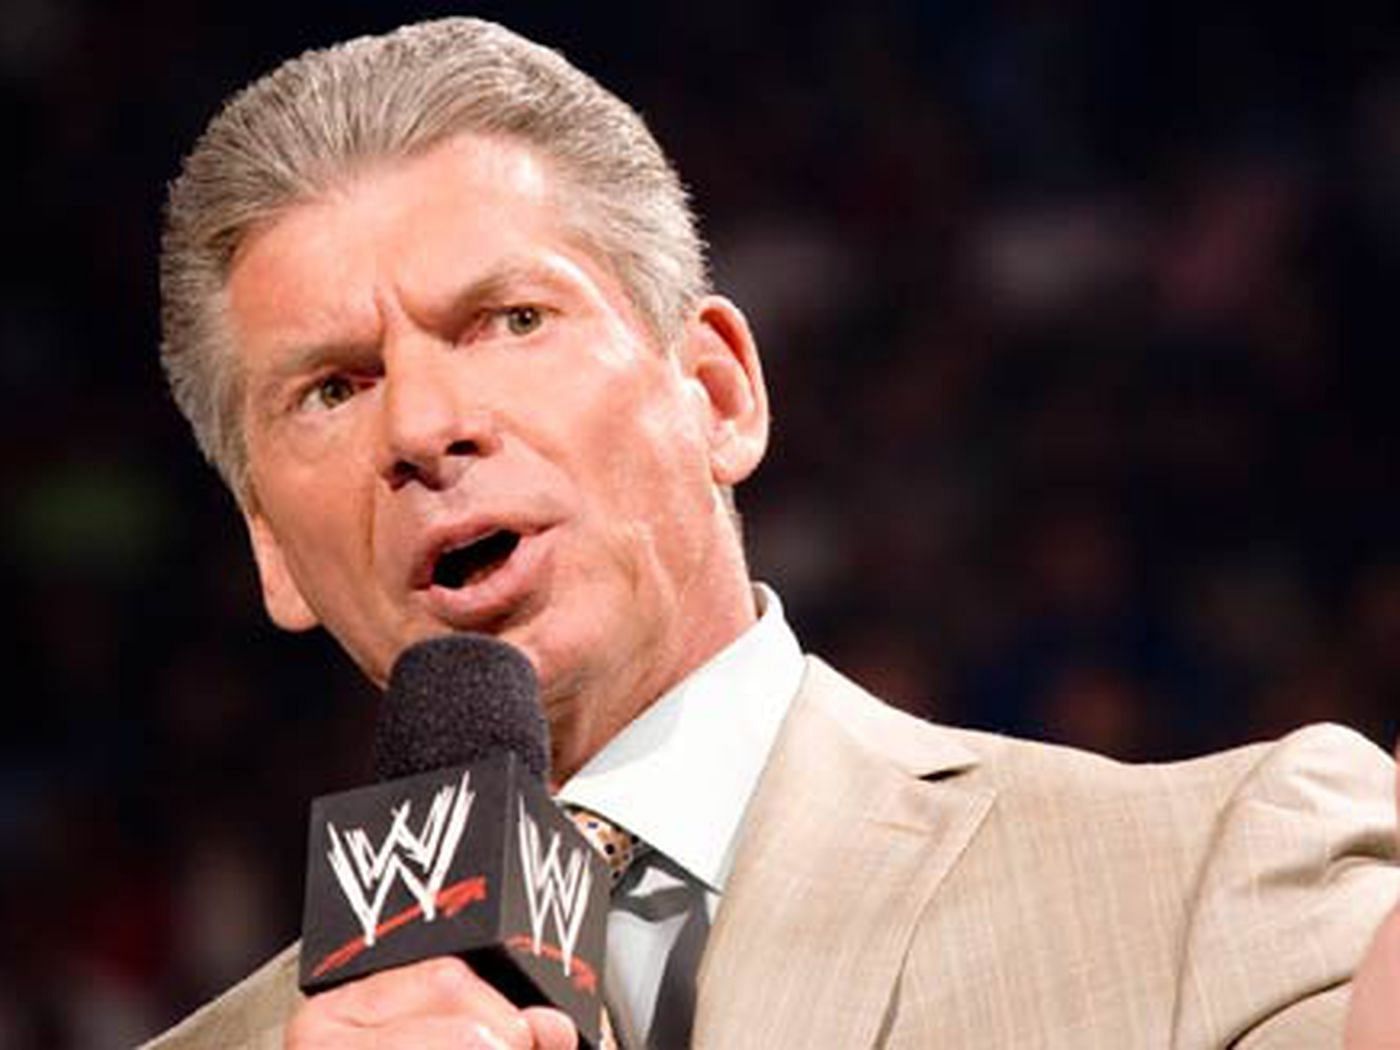 Vince McMahon is no longer the man in power